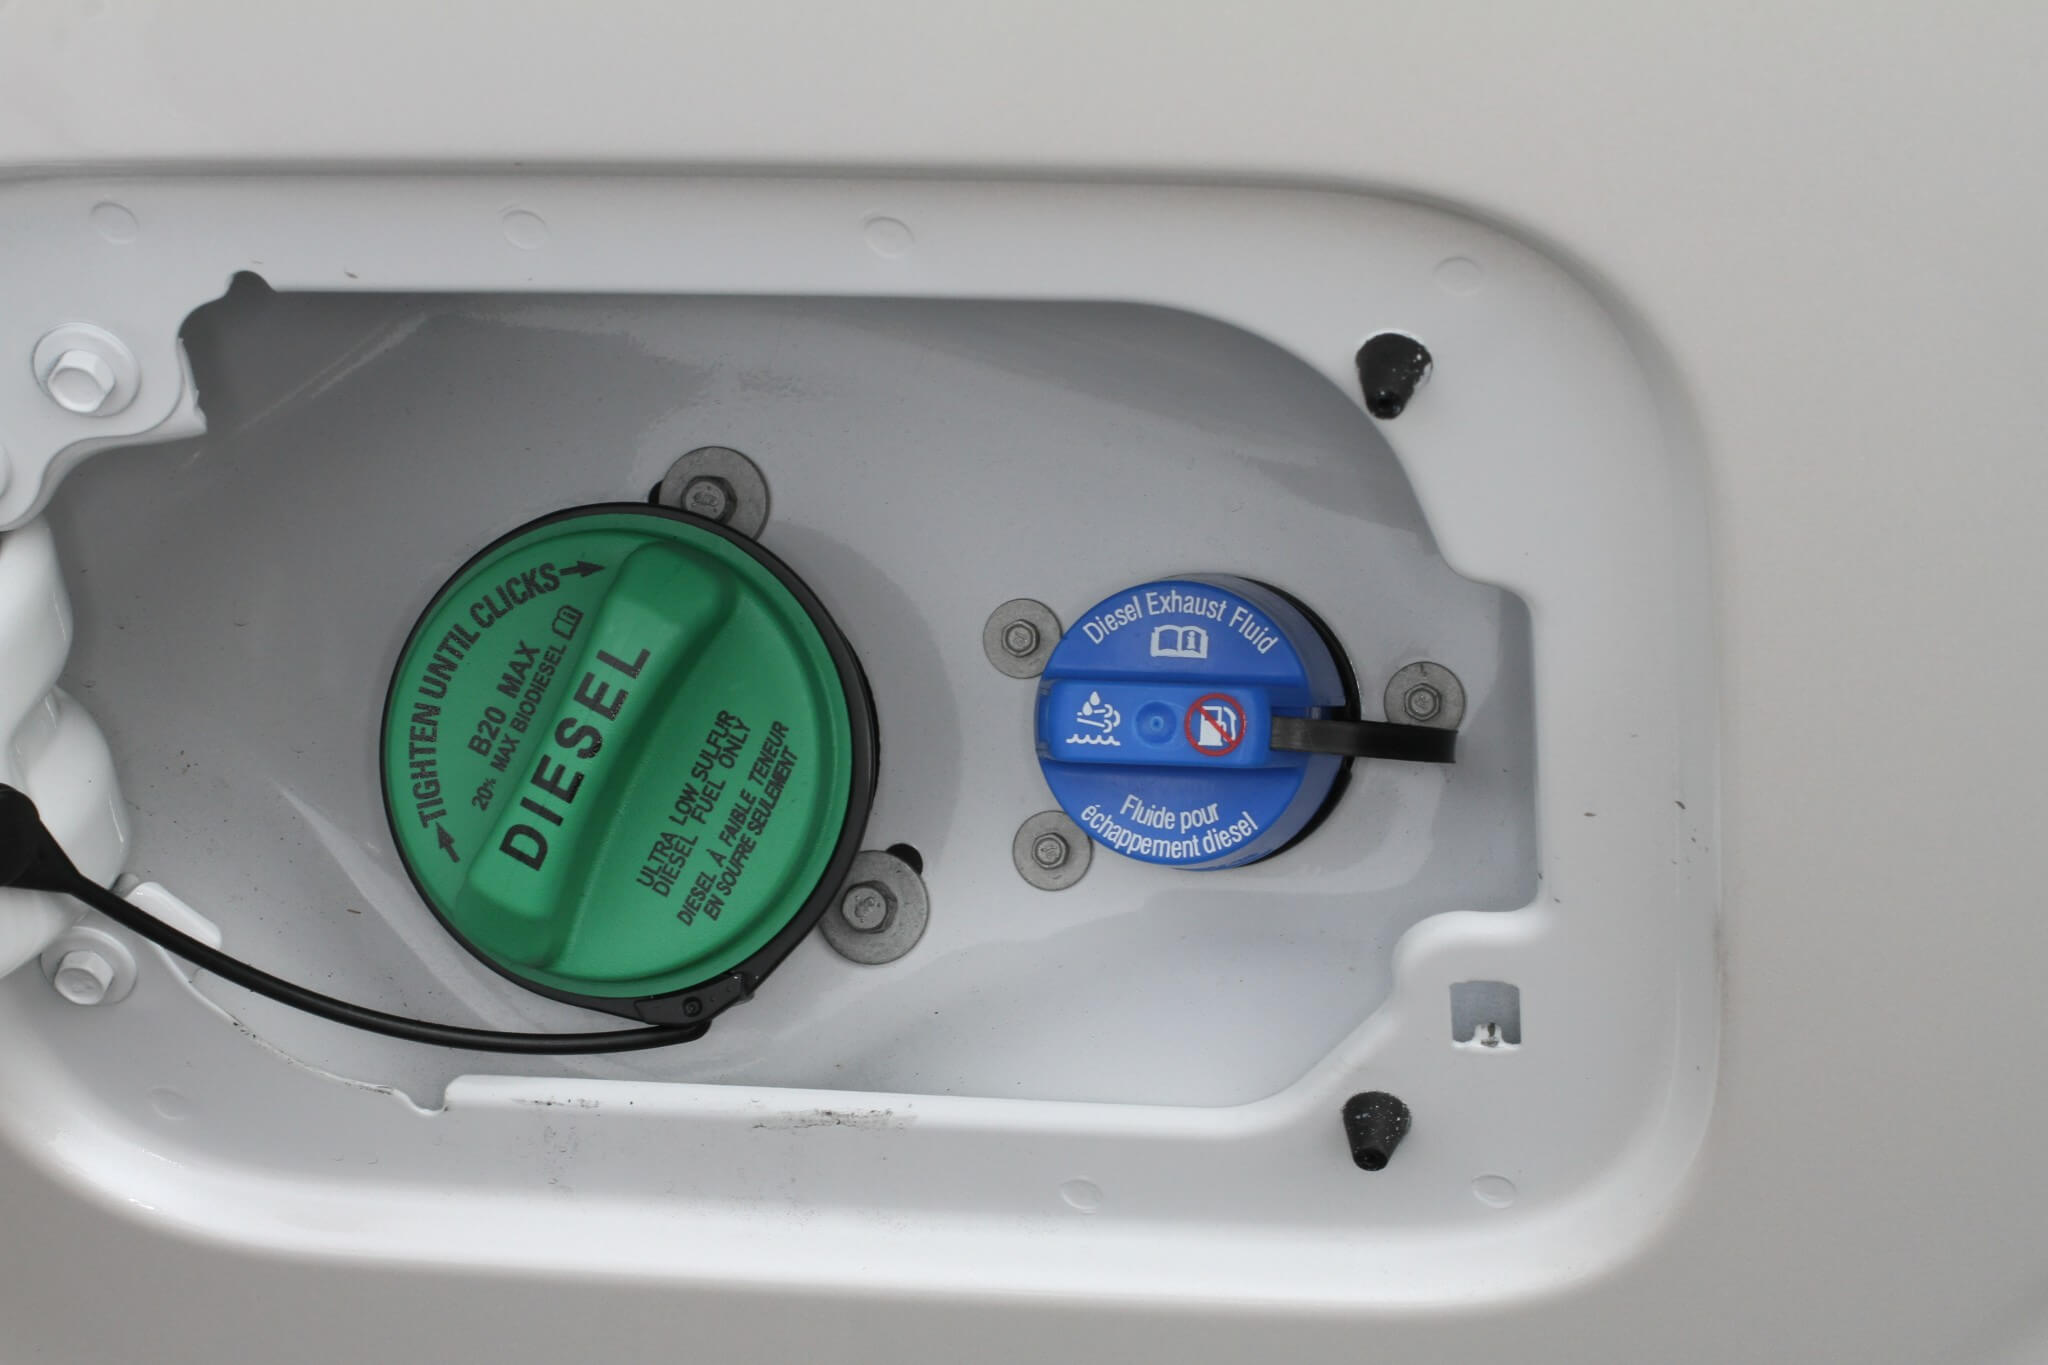 7. The DEF fill location is different between models and brands. The fuel and DEF fill are both located in the fuel door on this Ford pickup. While diesel fuel caps can vary in color, green is the most common. DEF fill caps are typically blue.